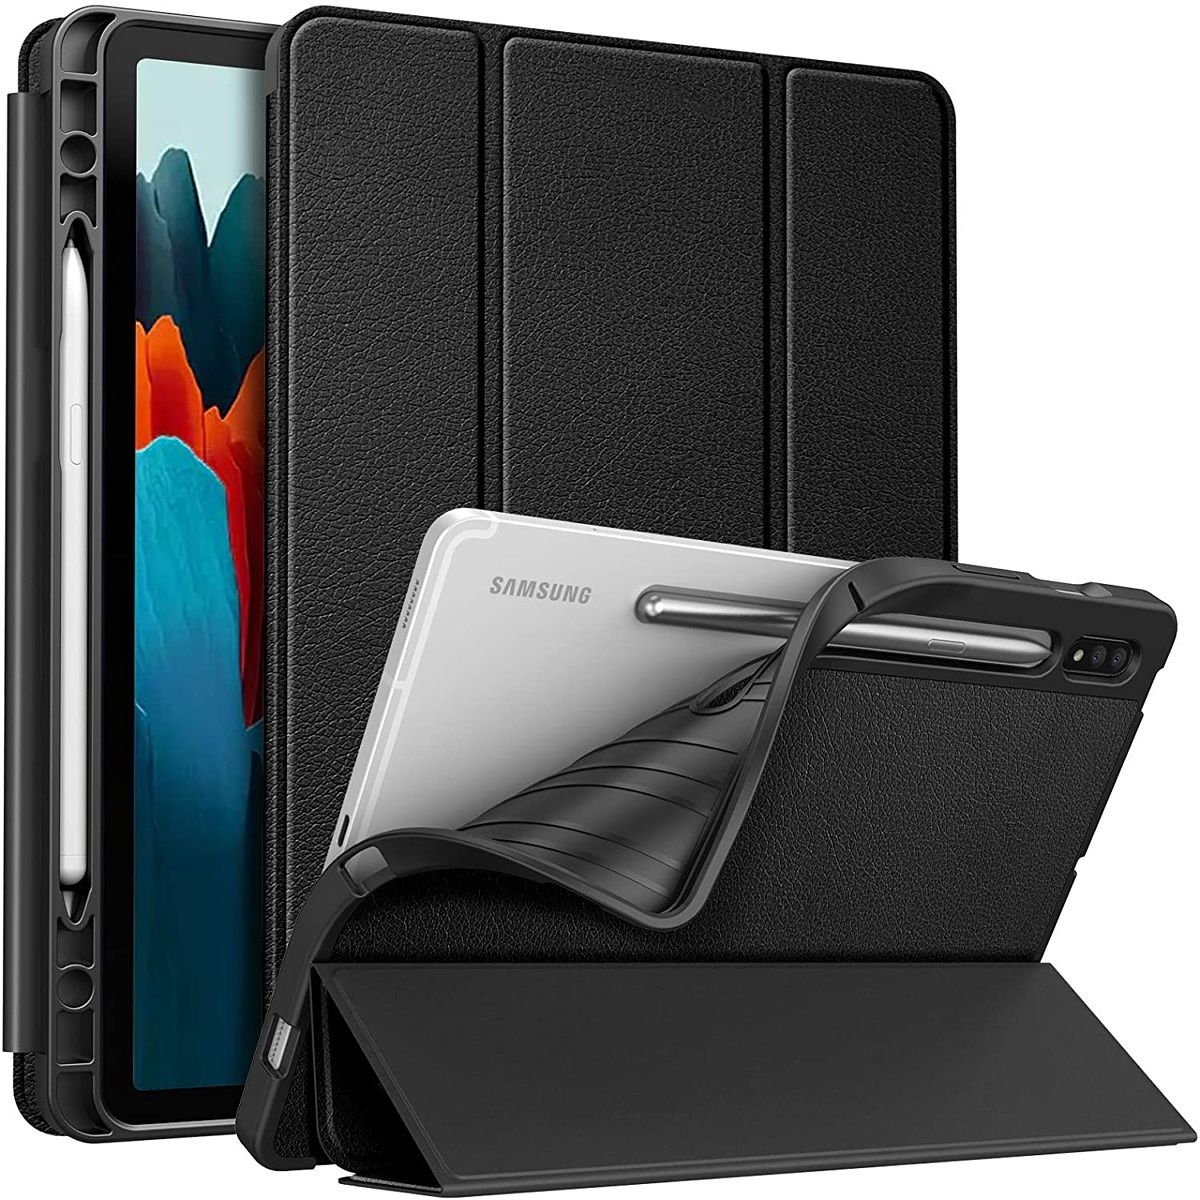 This folio case has a TPU back with a nice leather-like texture on the front. It looks quite premium and it's affordable.